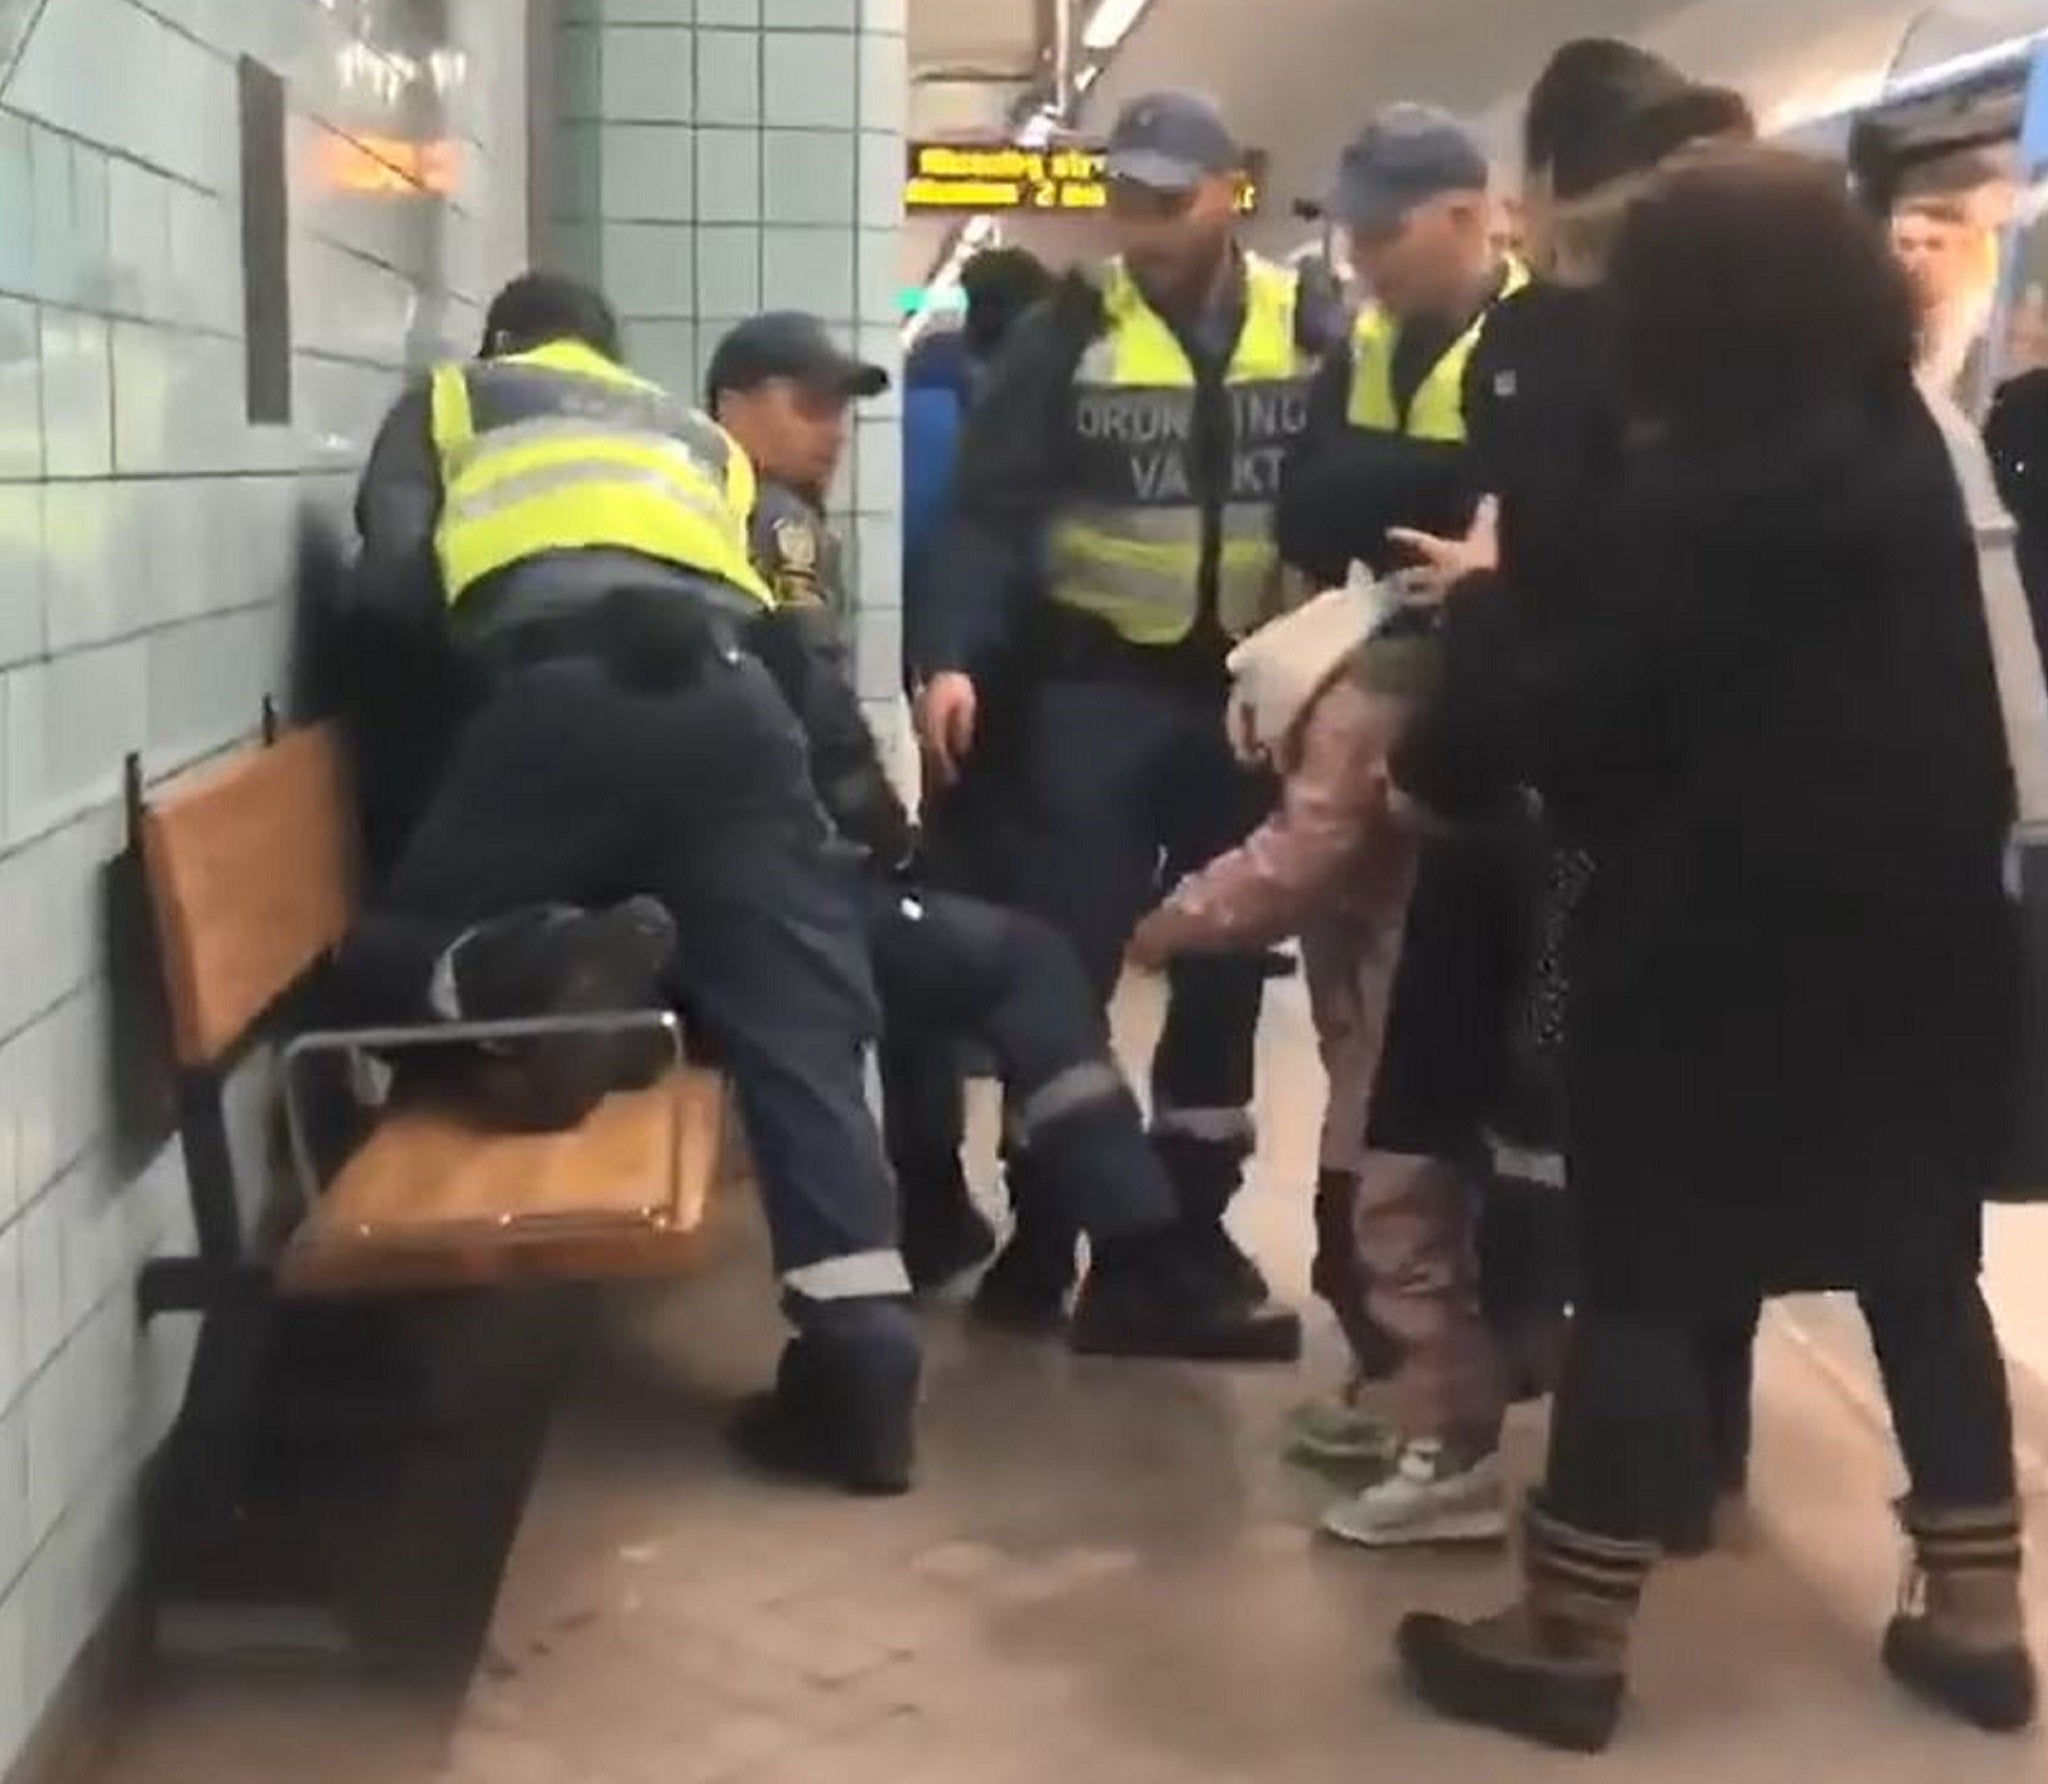 Police are investigating after a pregnant woman was dragged off a train in Stockholm, Sweden, by security guards on 31 January 2019